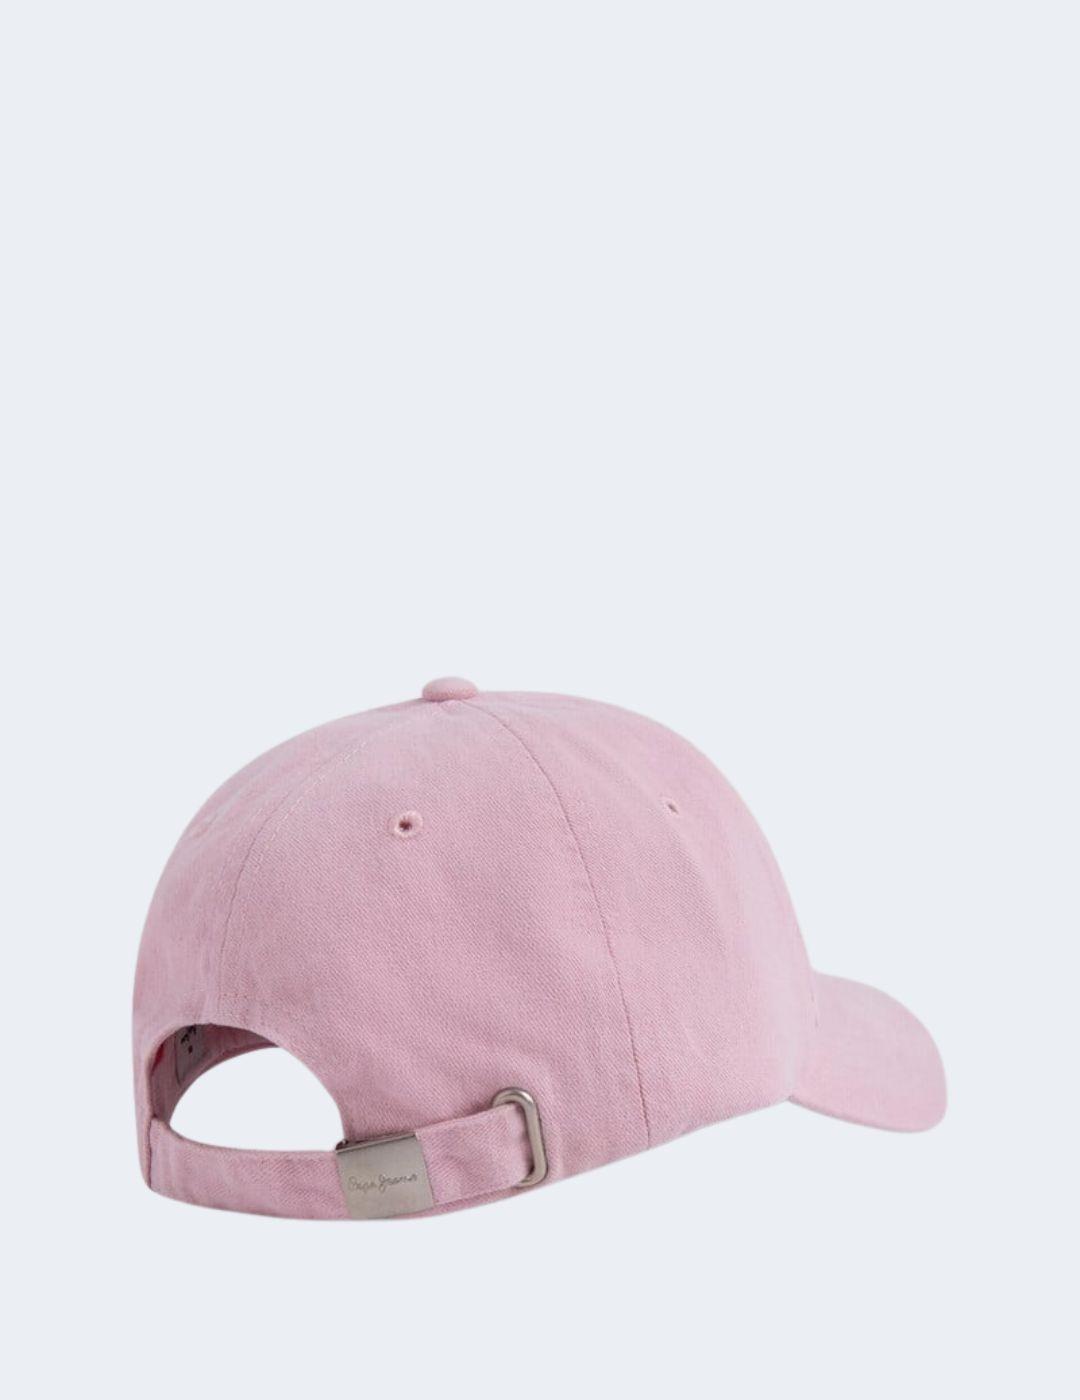 Gorra Pepe Jeans Mujer Ophelie Soleil Rosa